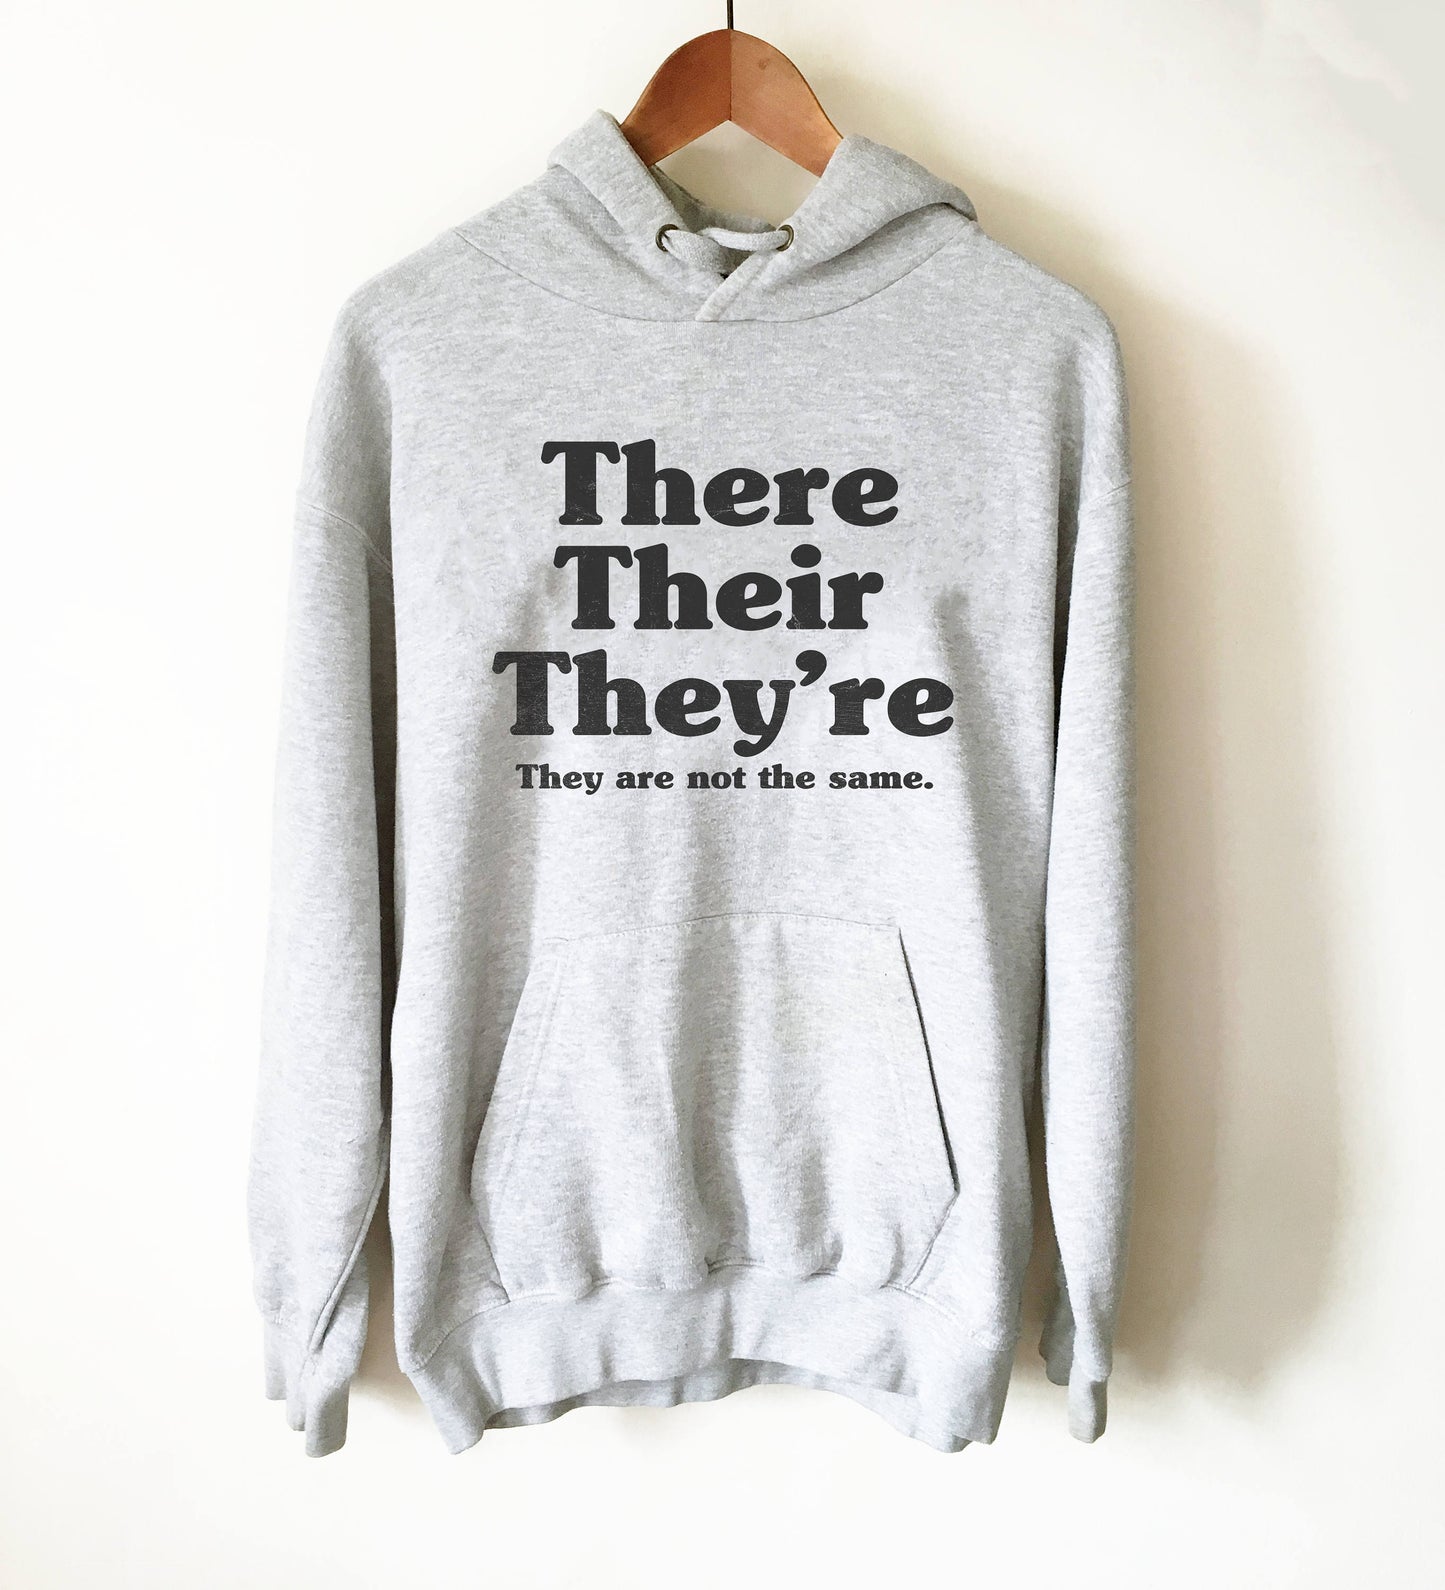 There Their They're They Are Not The Same Hoodie - English Teacher gift, Book lover t shirts, Grammar, Vocabulary, Punctuation